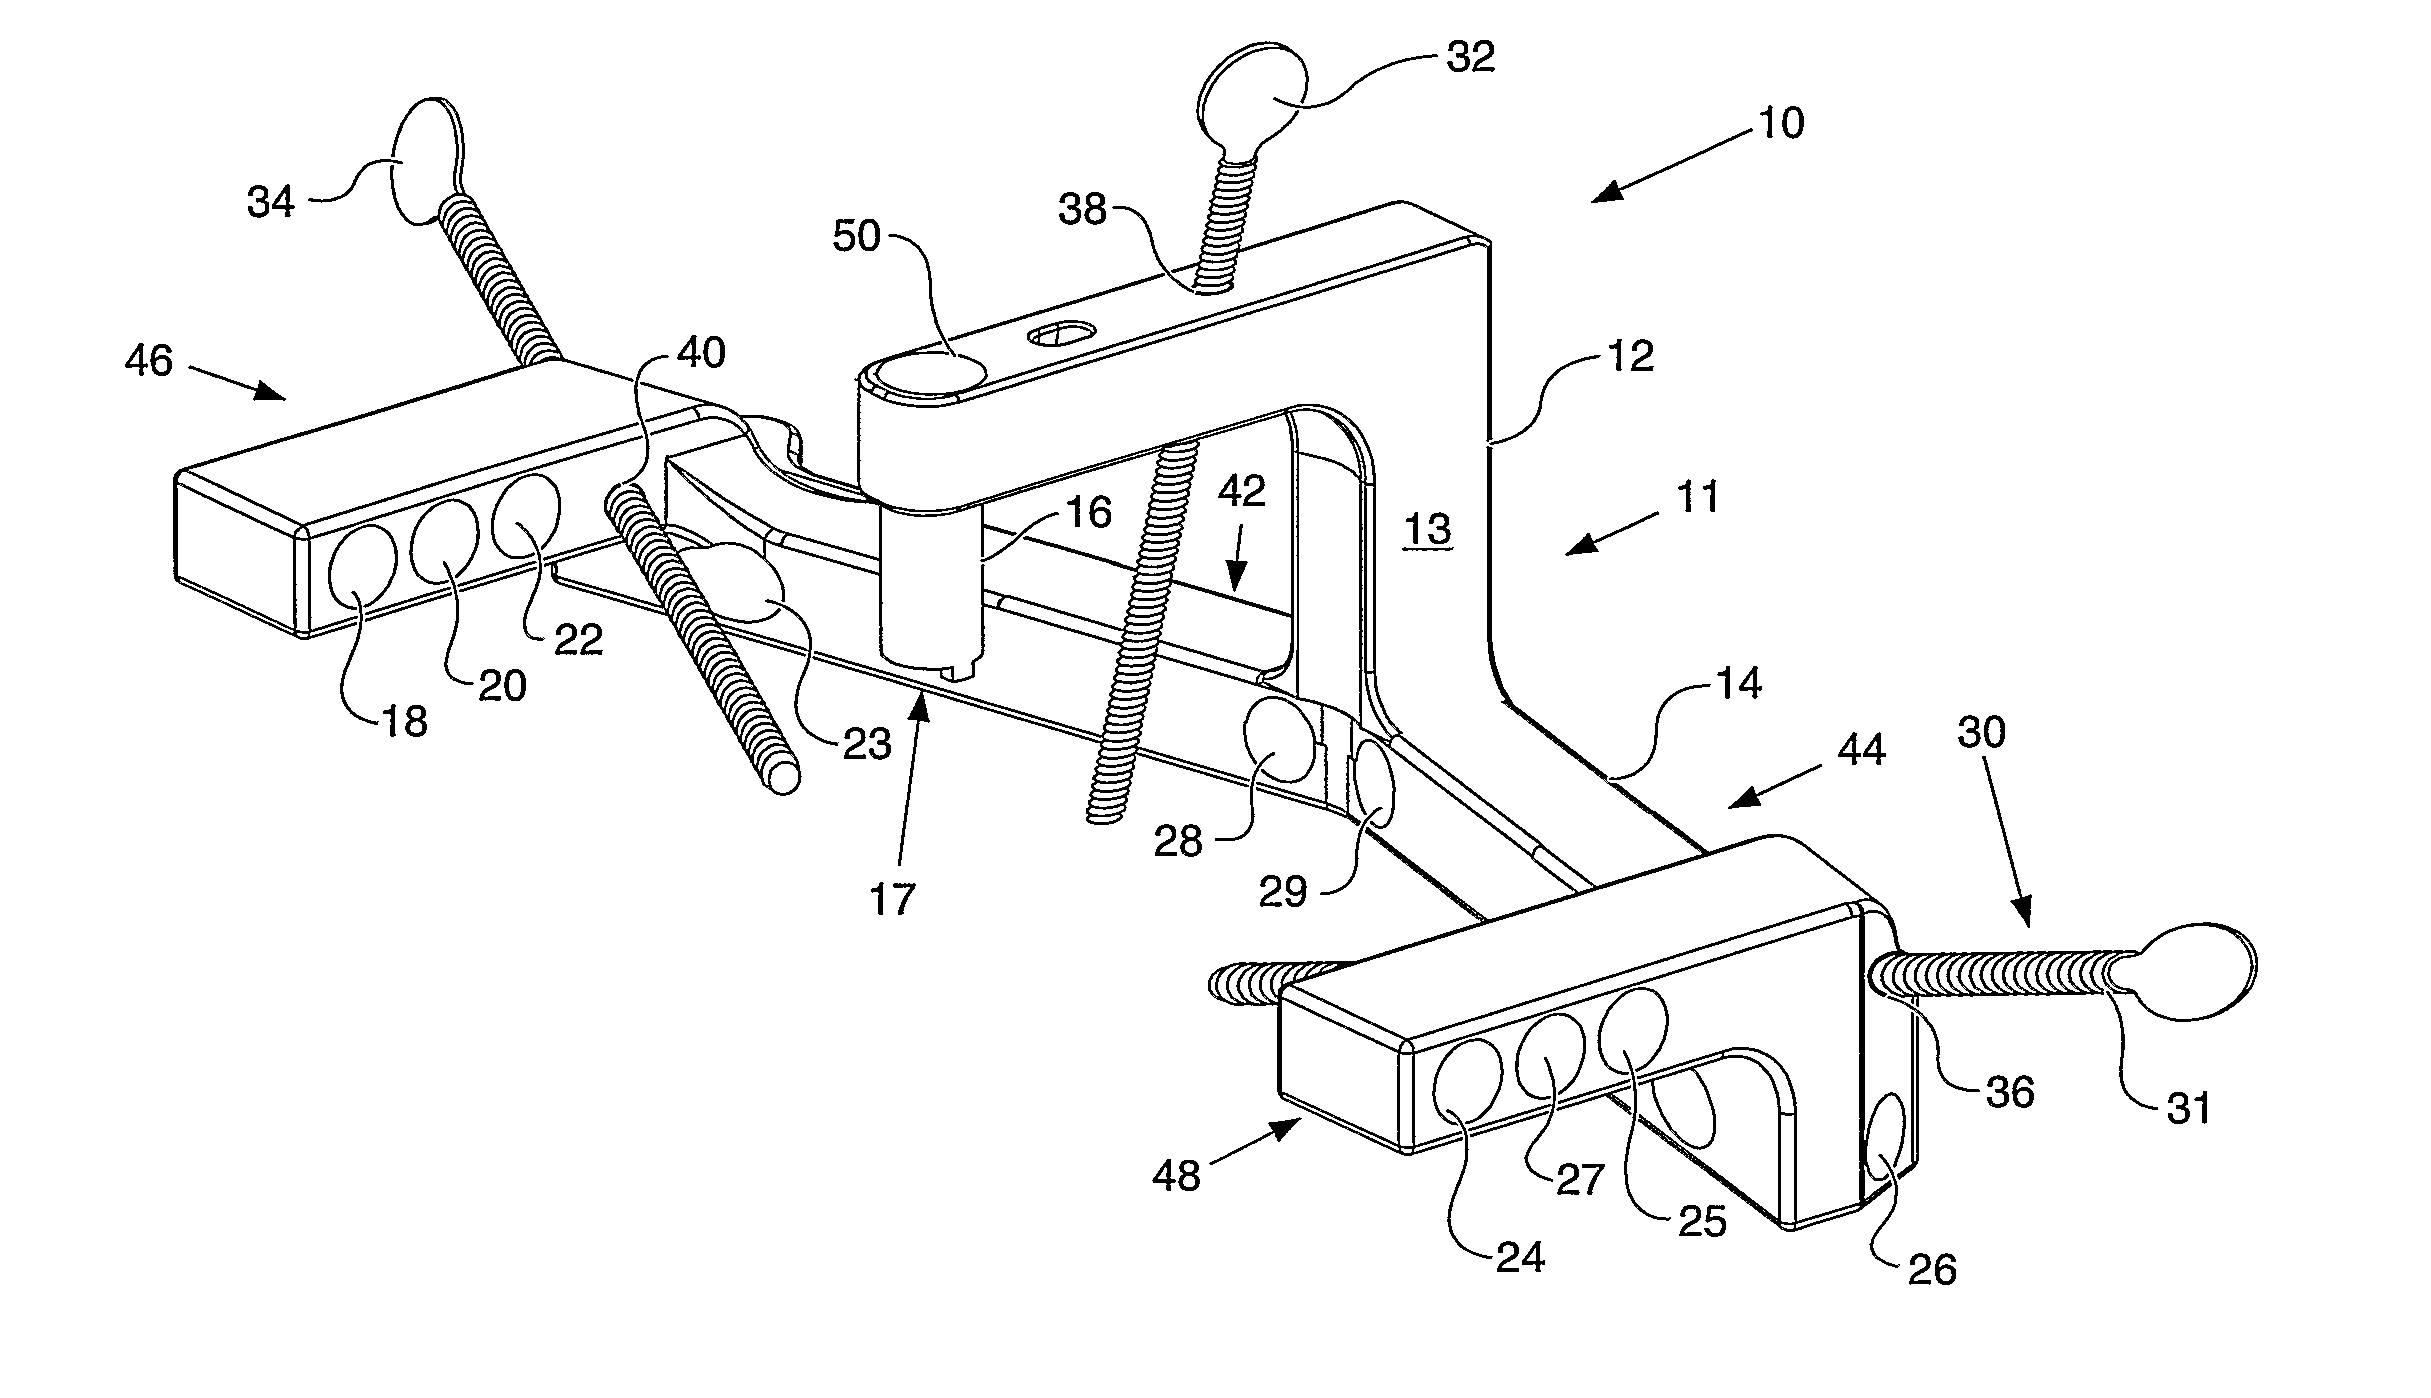 Instrument for fracture fragment alignment and stabilization